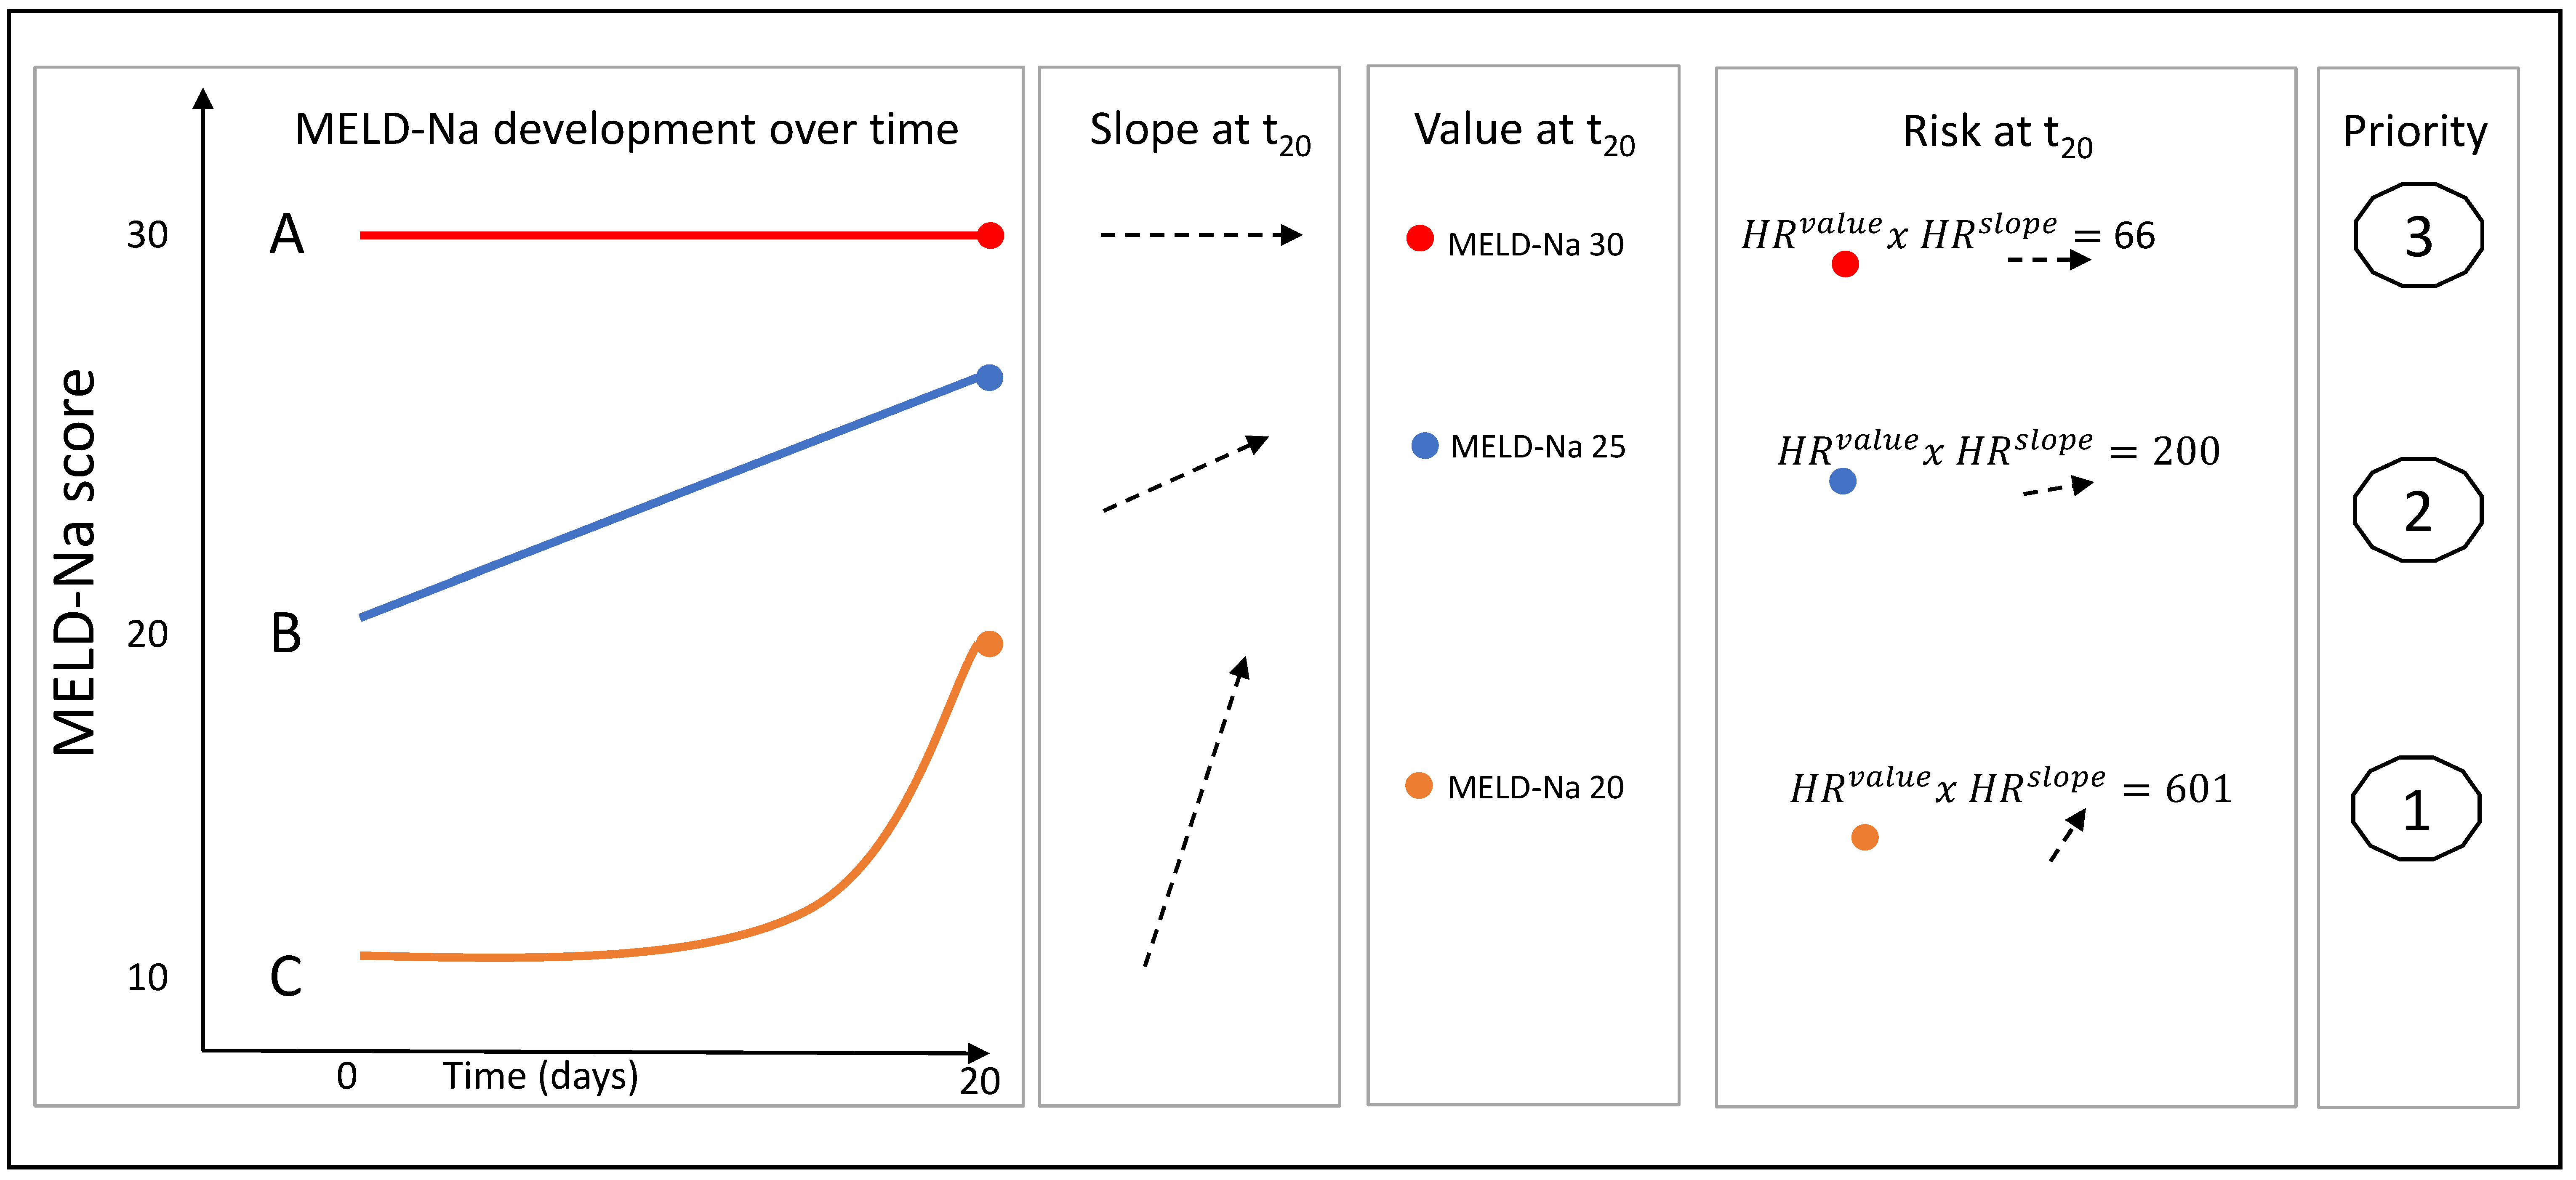 Three hypothetical patient MELD-Na trajectories over time, each illustrates differences in value, slope and risk.